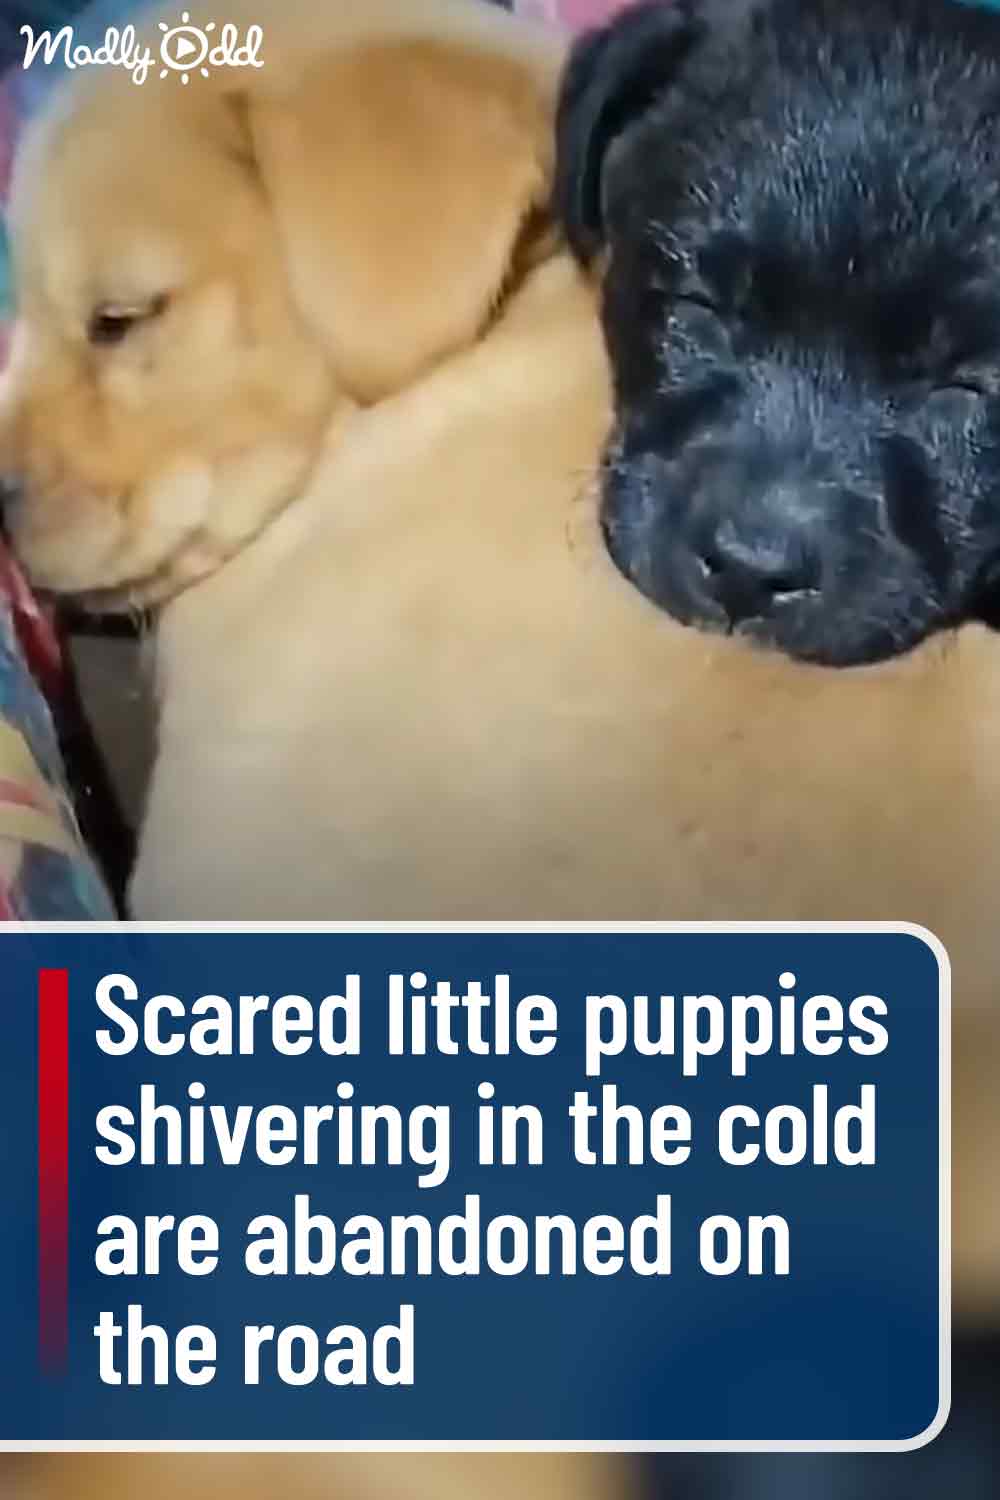 Scared little puppies shivering in the cold are abandoned on the road